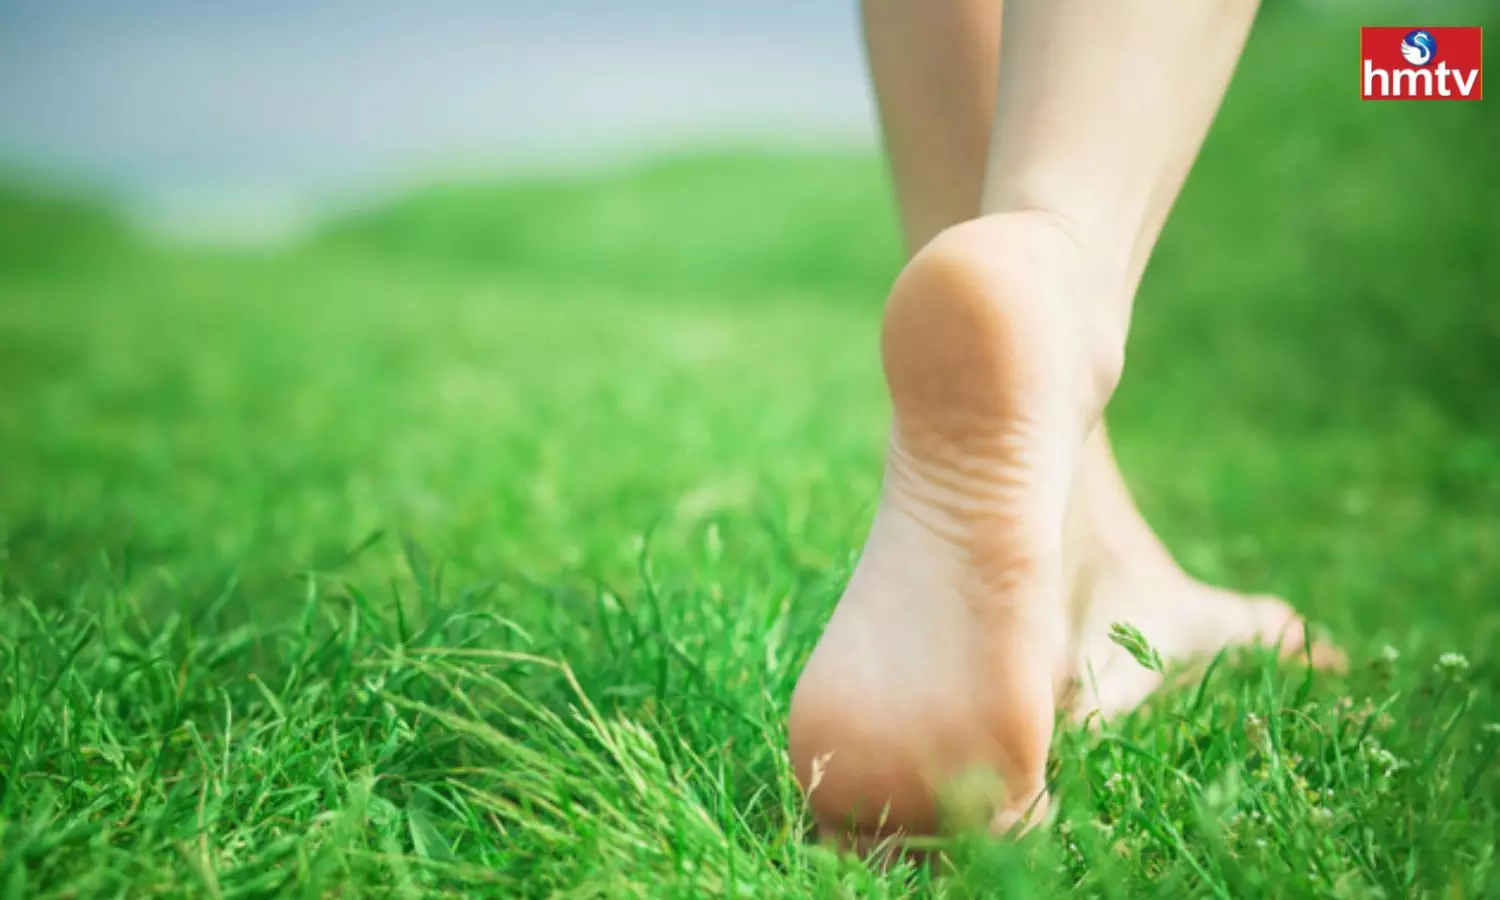 Benefits of Walking Barefoot in Grass